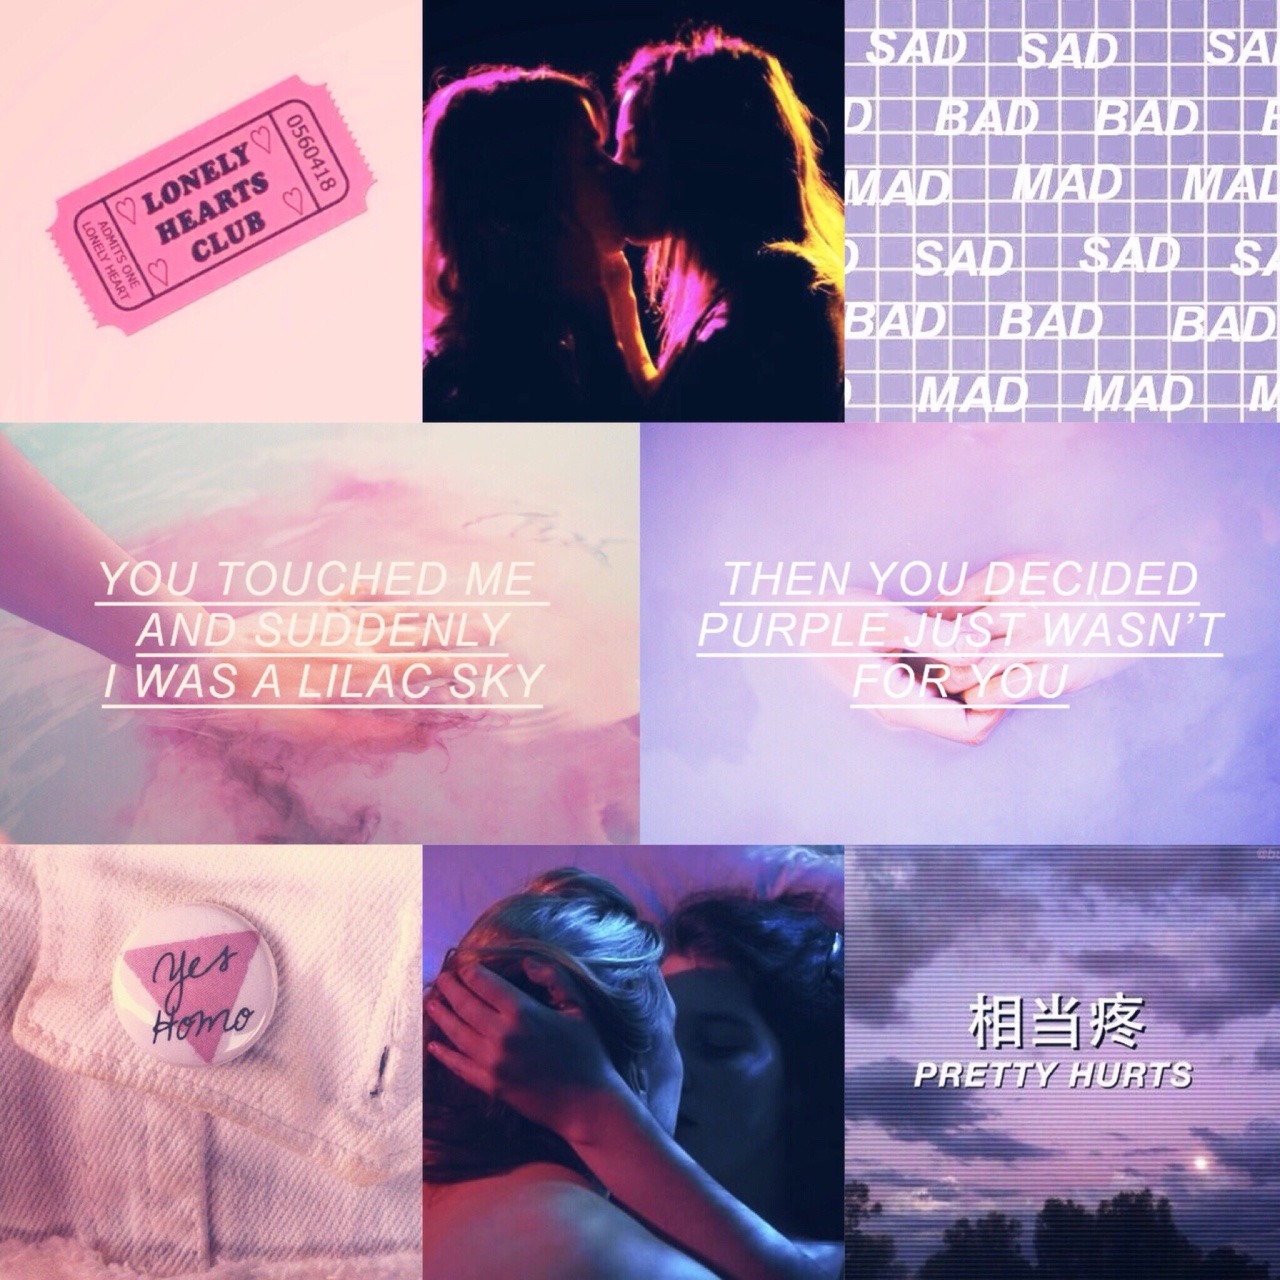 Crying Astronaut — Song aesthetic - Halsey - Colors 💝